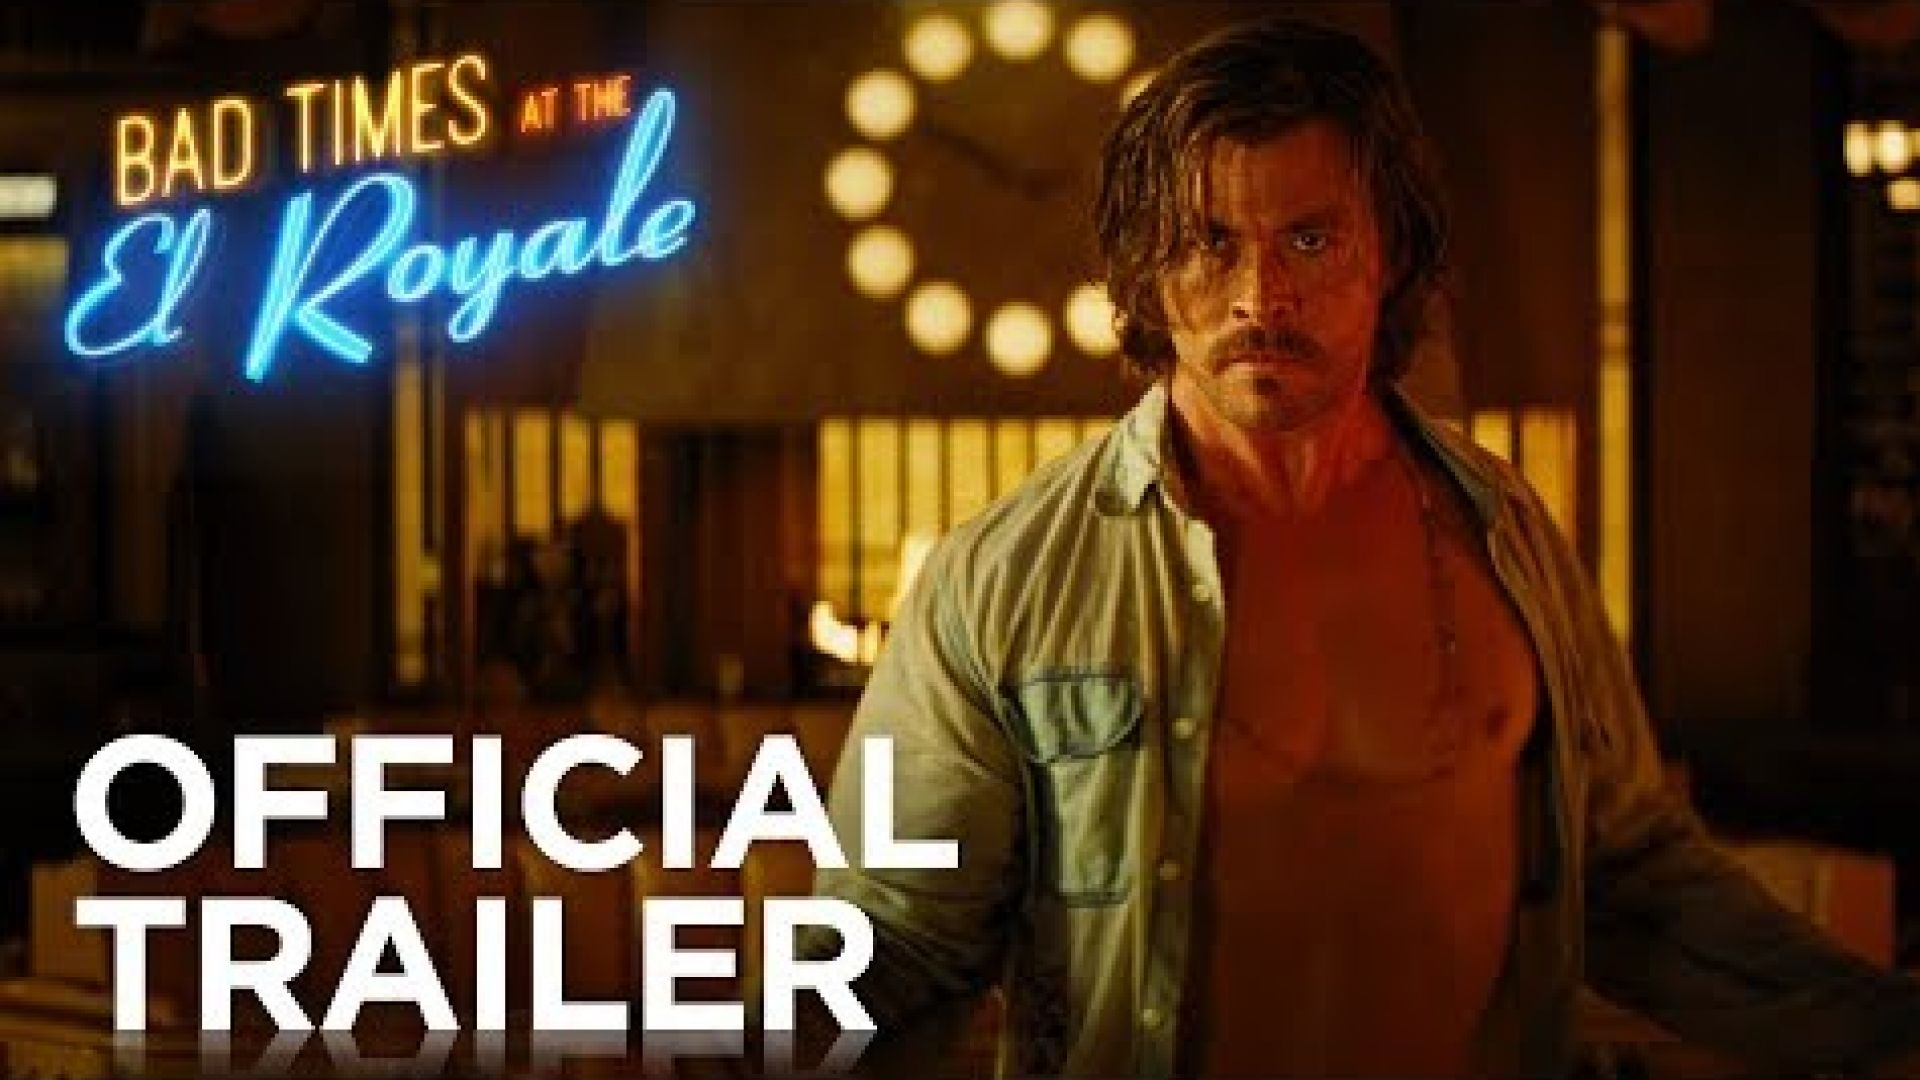 'Bad Times At The El Royale' Trailer - 20th Century Fox